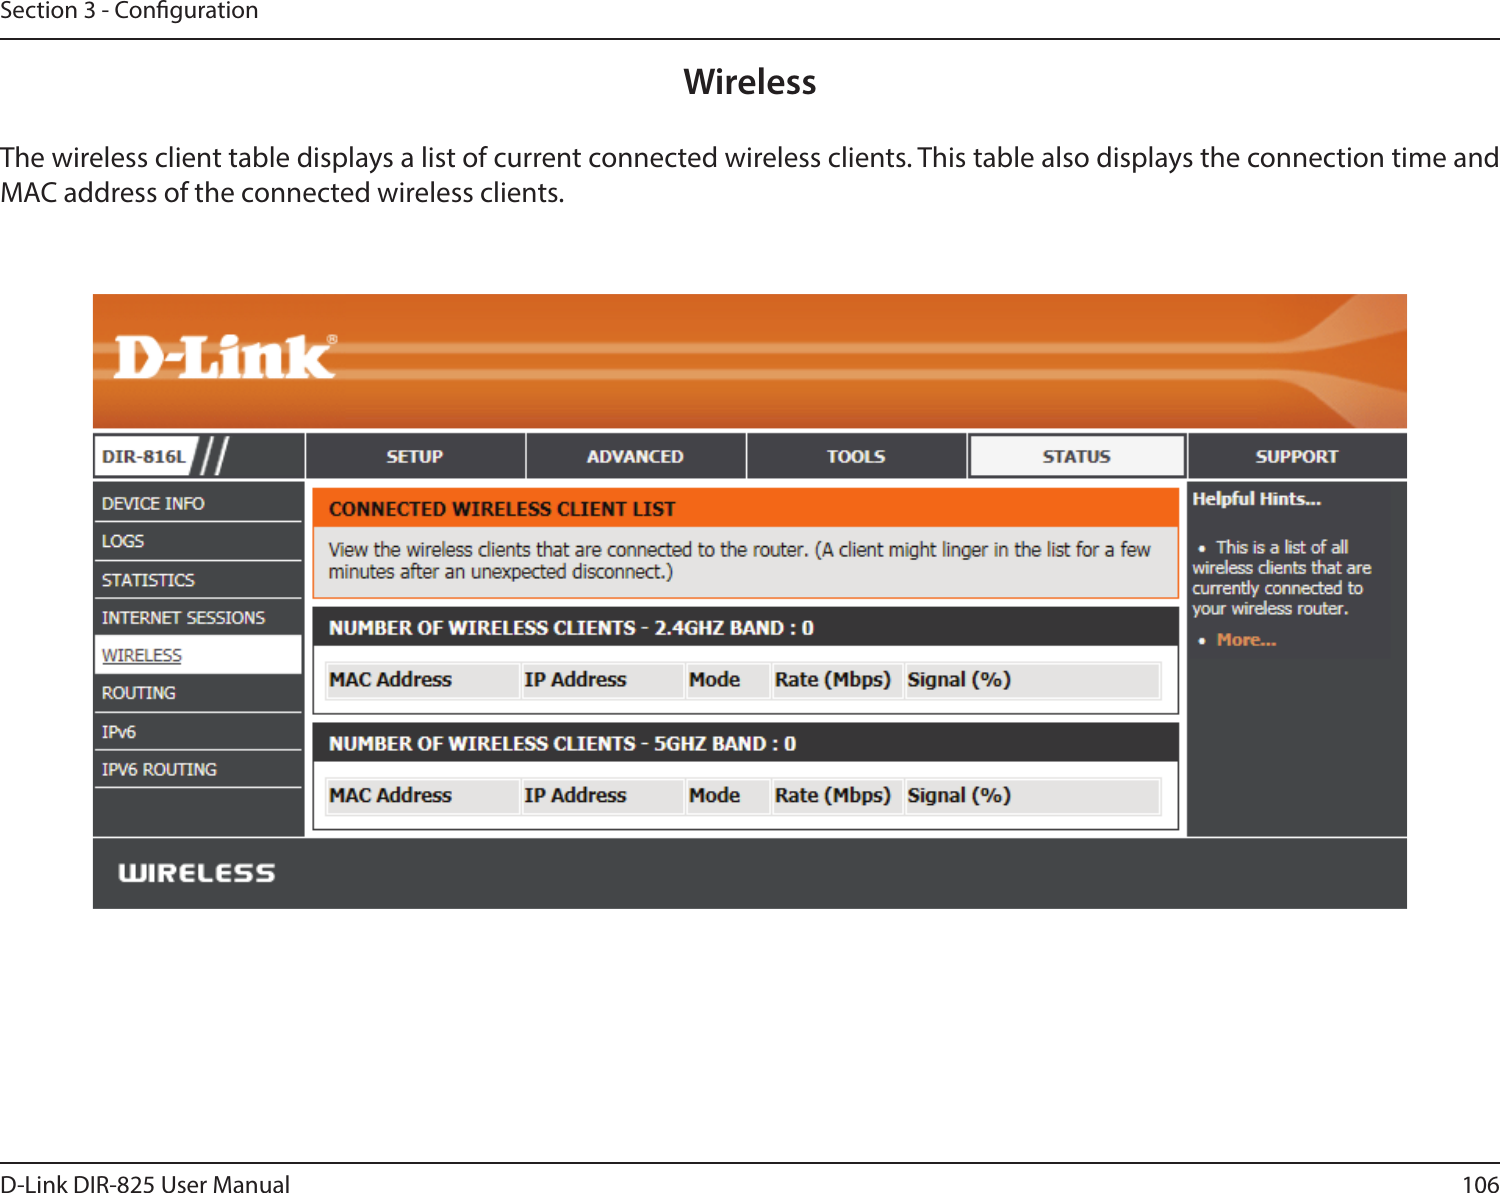 106D-Link DIR-825 User ManualSection 3 - CongurationThe wireless client table displays a list of current connected wireless clients. This table also displays the connection time and MAC address of the connected wireless clients.Wireless